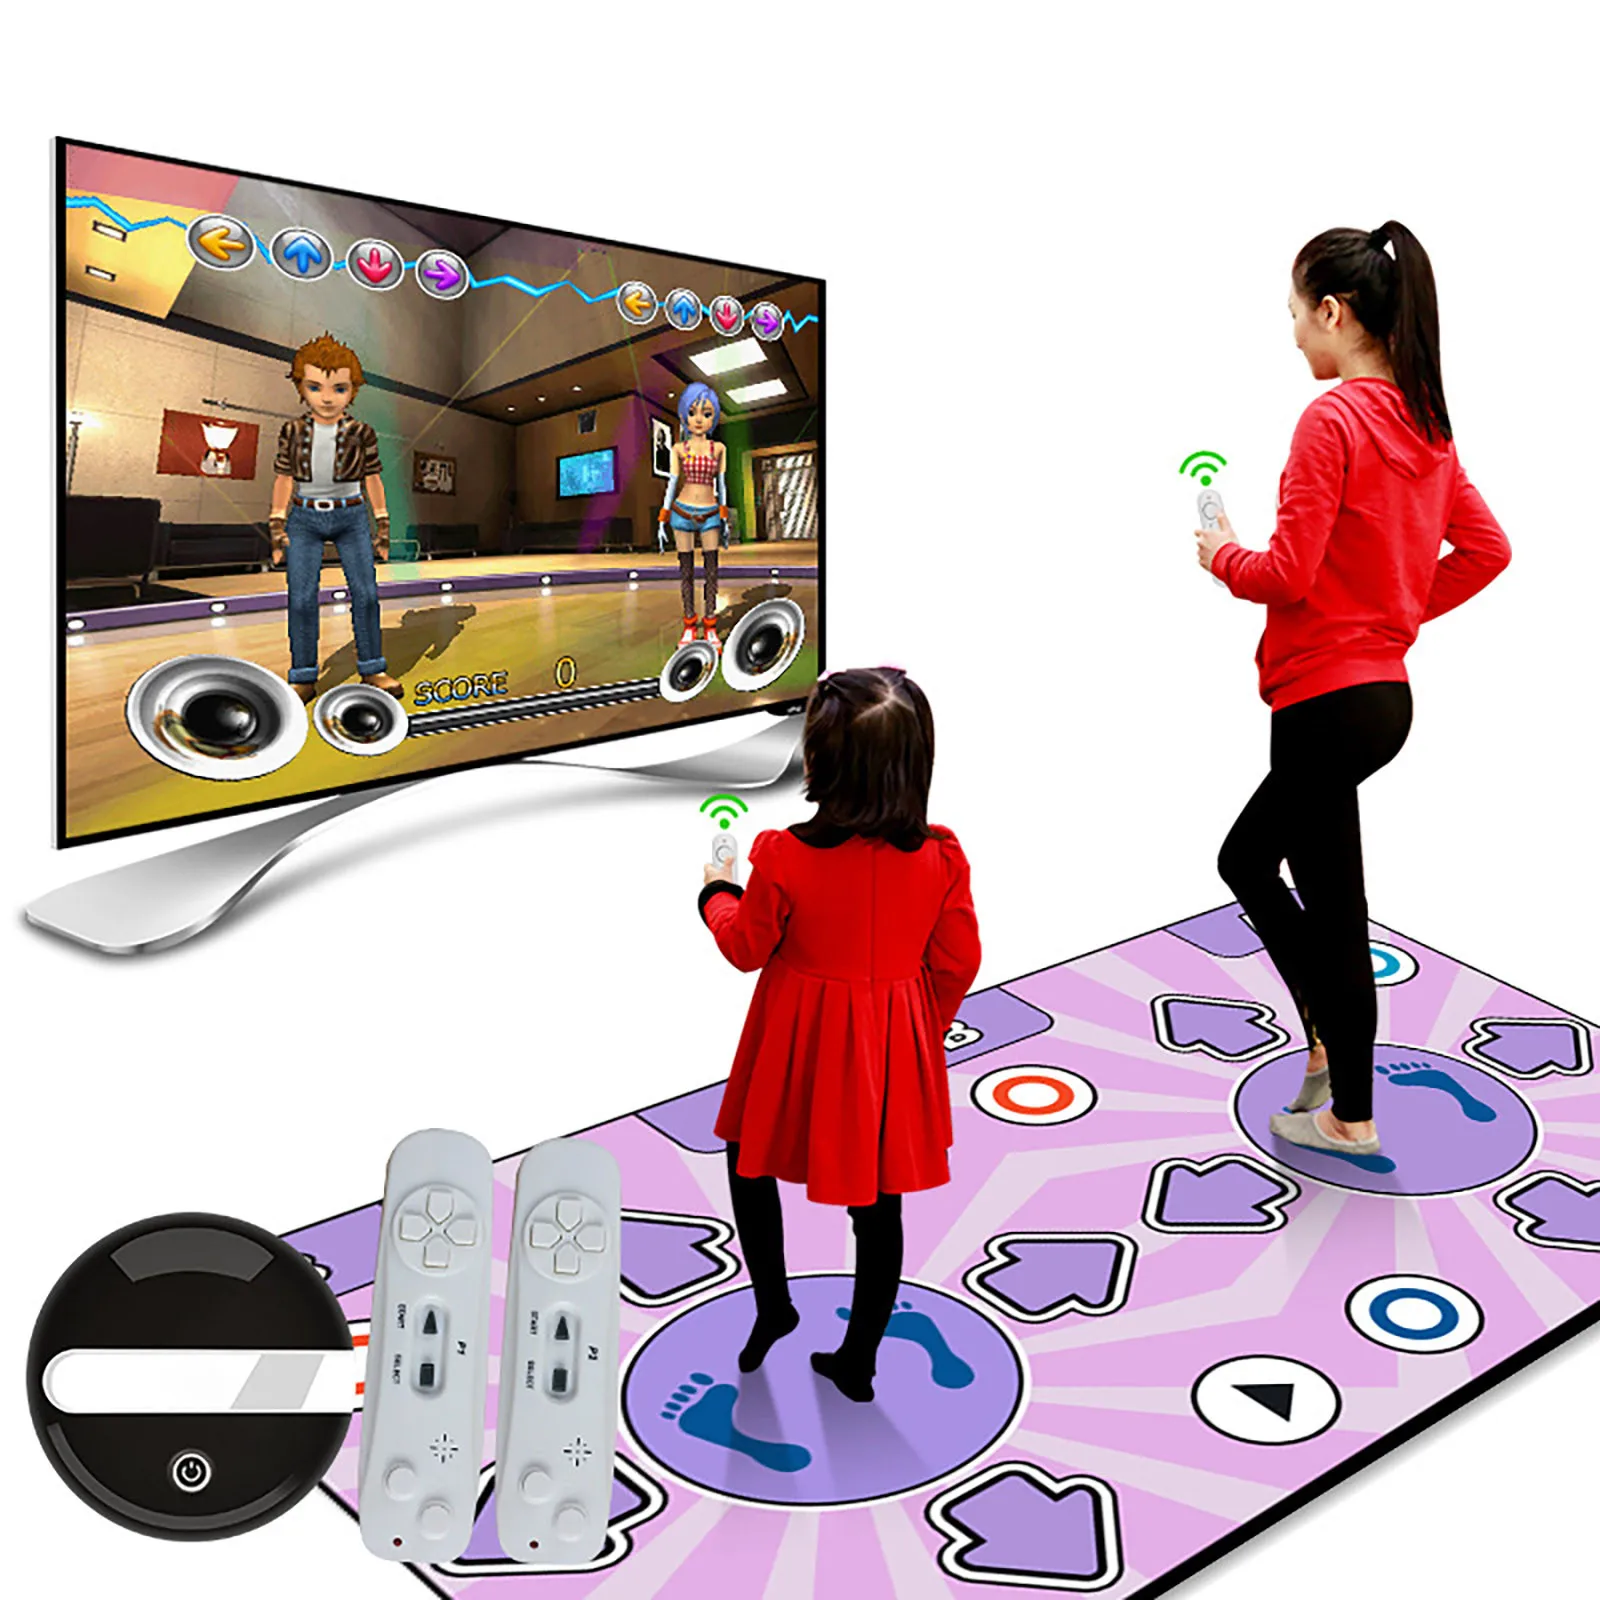 

Double User Wireless Electronic Dance Mat for Kids Adults Dancer Step Music Pads Sense Game for PC TV, Plug Play Christmas A20